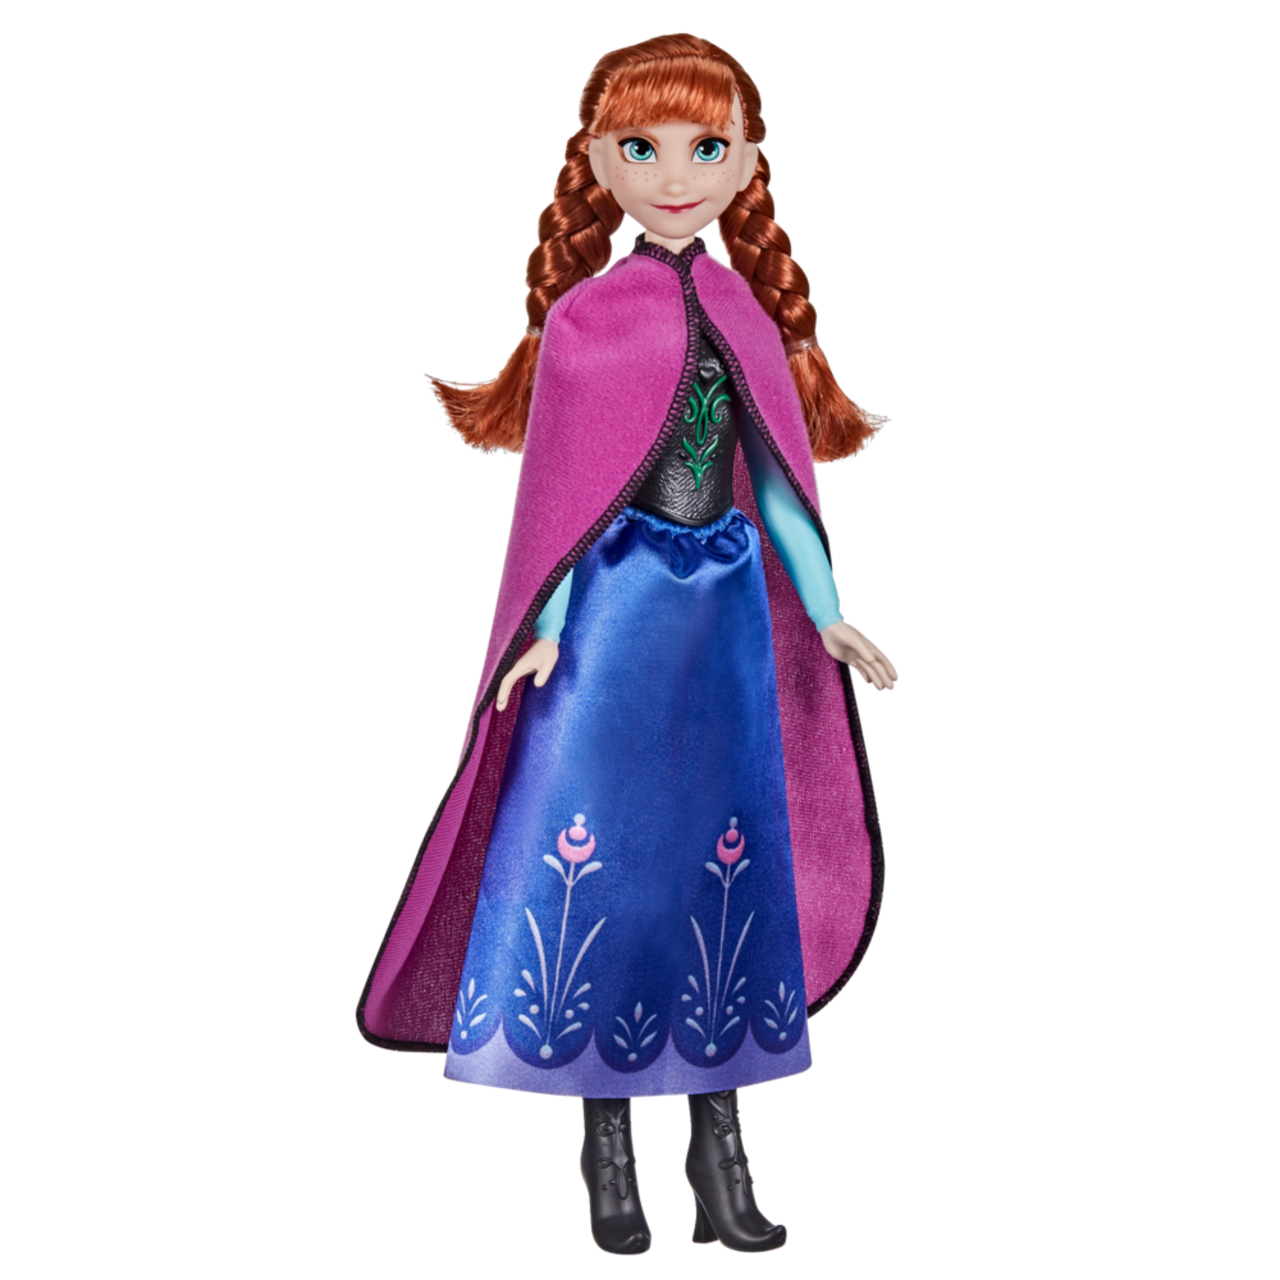 https://media-www.canadiantire.ca/product/seasonal-gardening/toys/toys-games/0508548/disney-s-frozen-shimmer-anna-fashion-doll-7e17af46-1aa3-46a9-9e51-7acd0f07acef.png?imdensity=1&imwidth=640&impolicy=mZoom